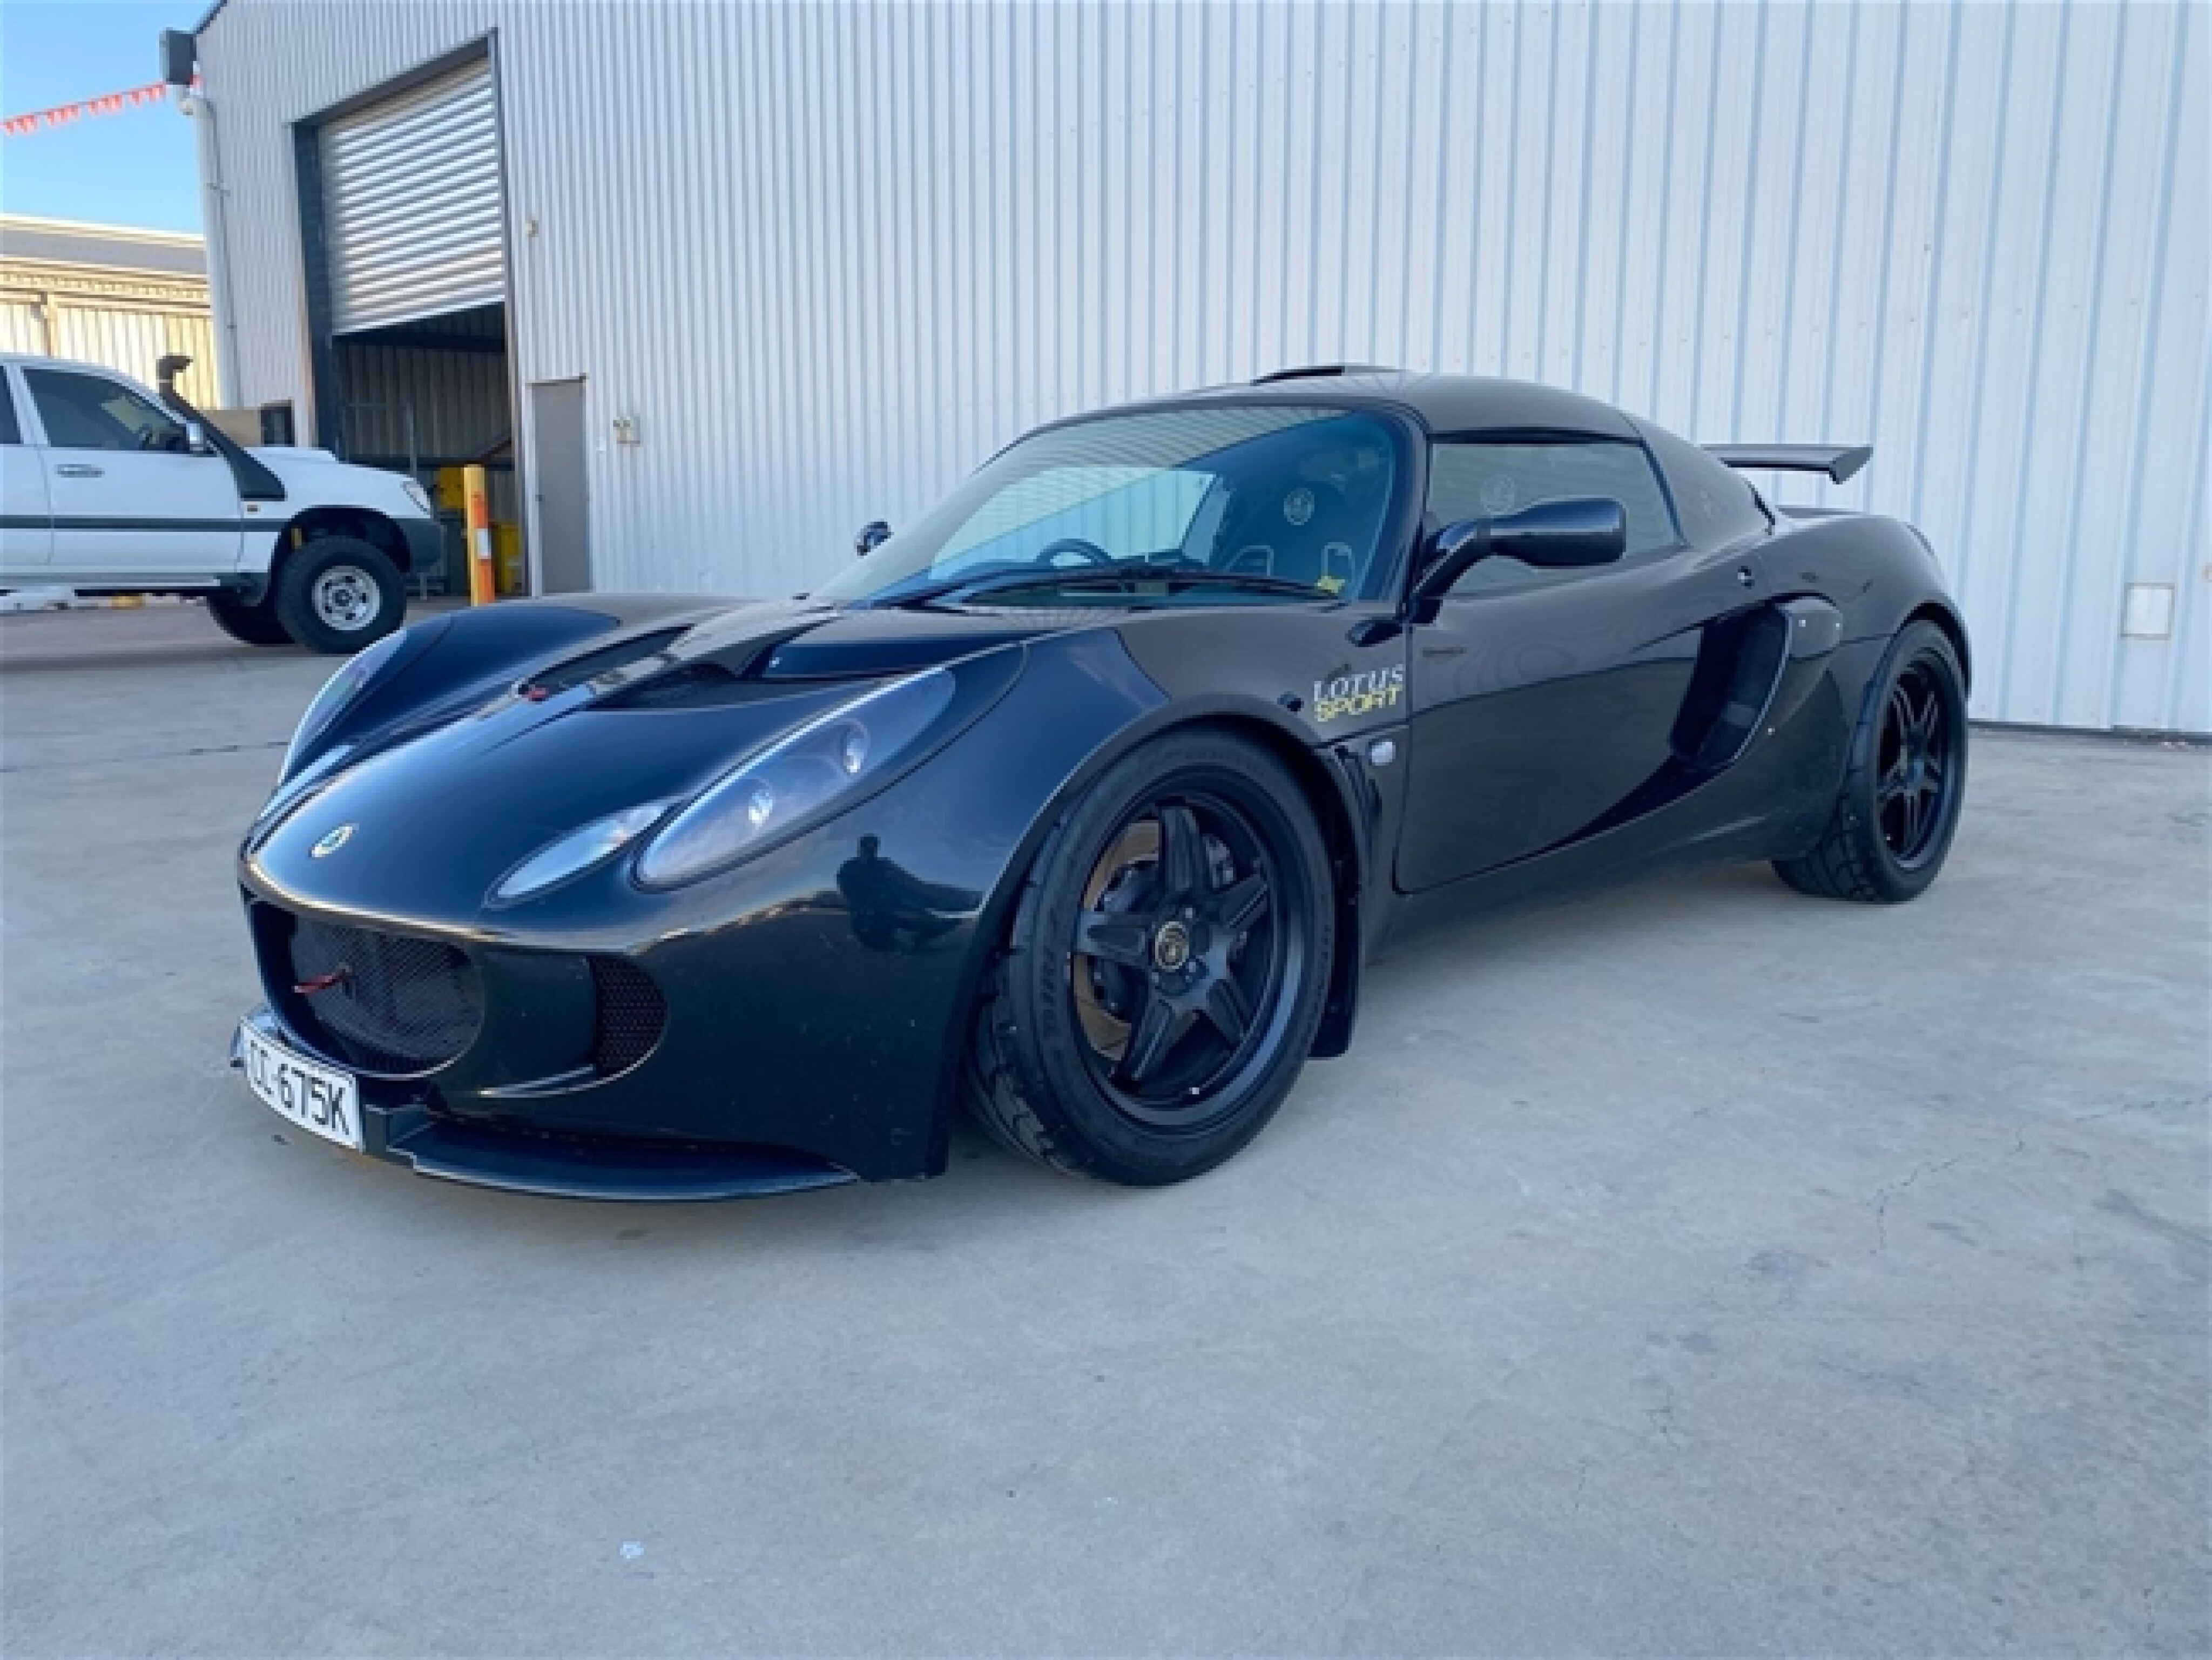 c731191a/2005 lotus exige manual coupe grays auctions 1 jpg